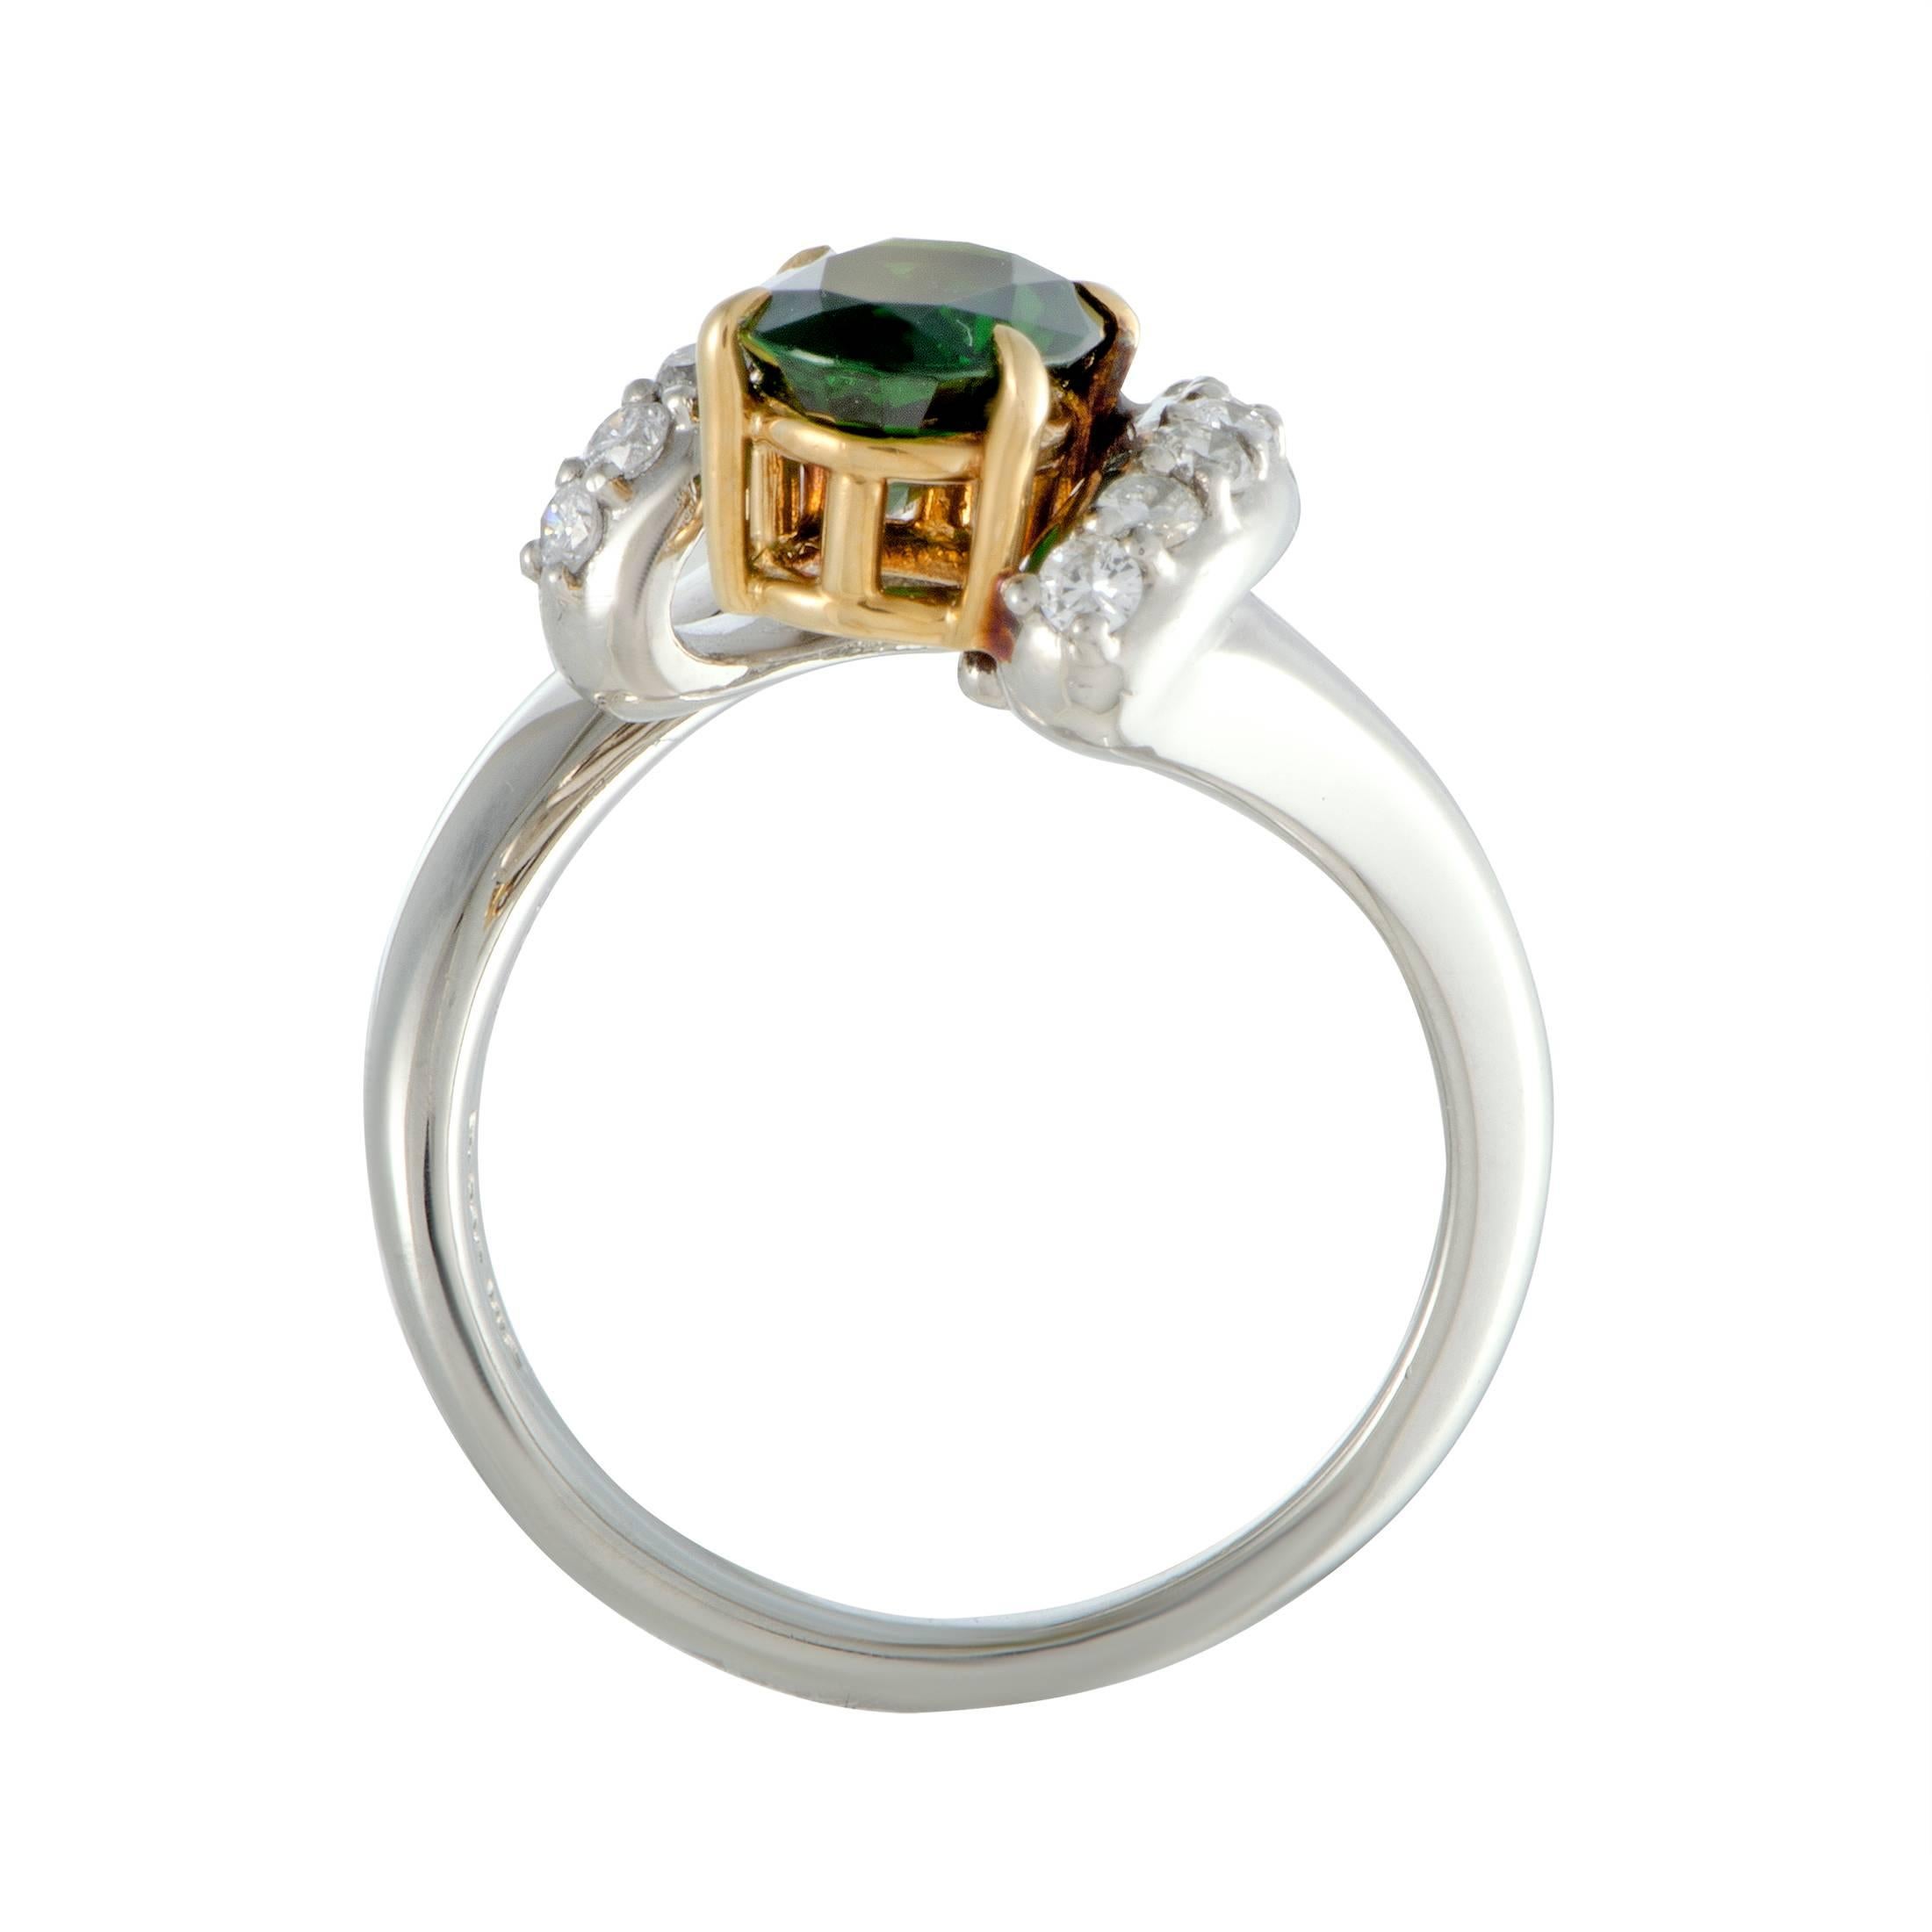 Offbeat design and bold combination of platinum and 18K yellow gold produce an incredibly eye-catching effect in this stunning ring that boasts an incredibly fashionable appeal. The ring features 0.45 carats of diamonds and a green tourmaline center